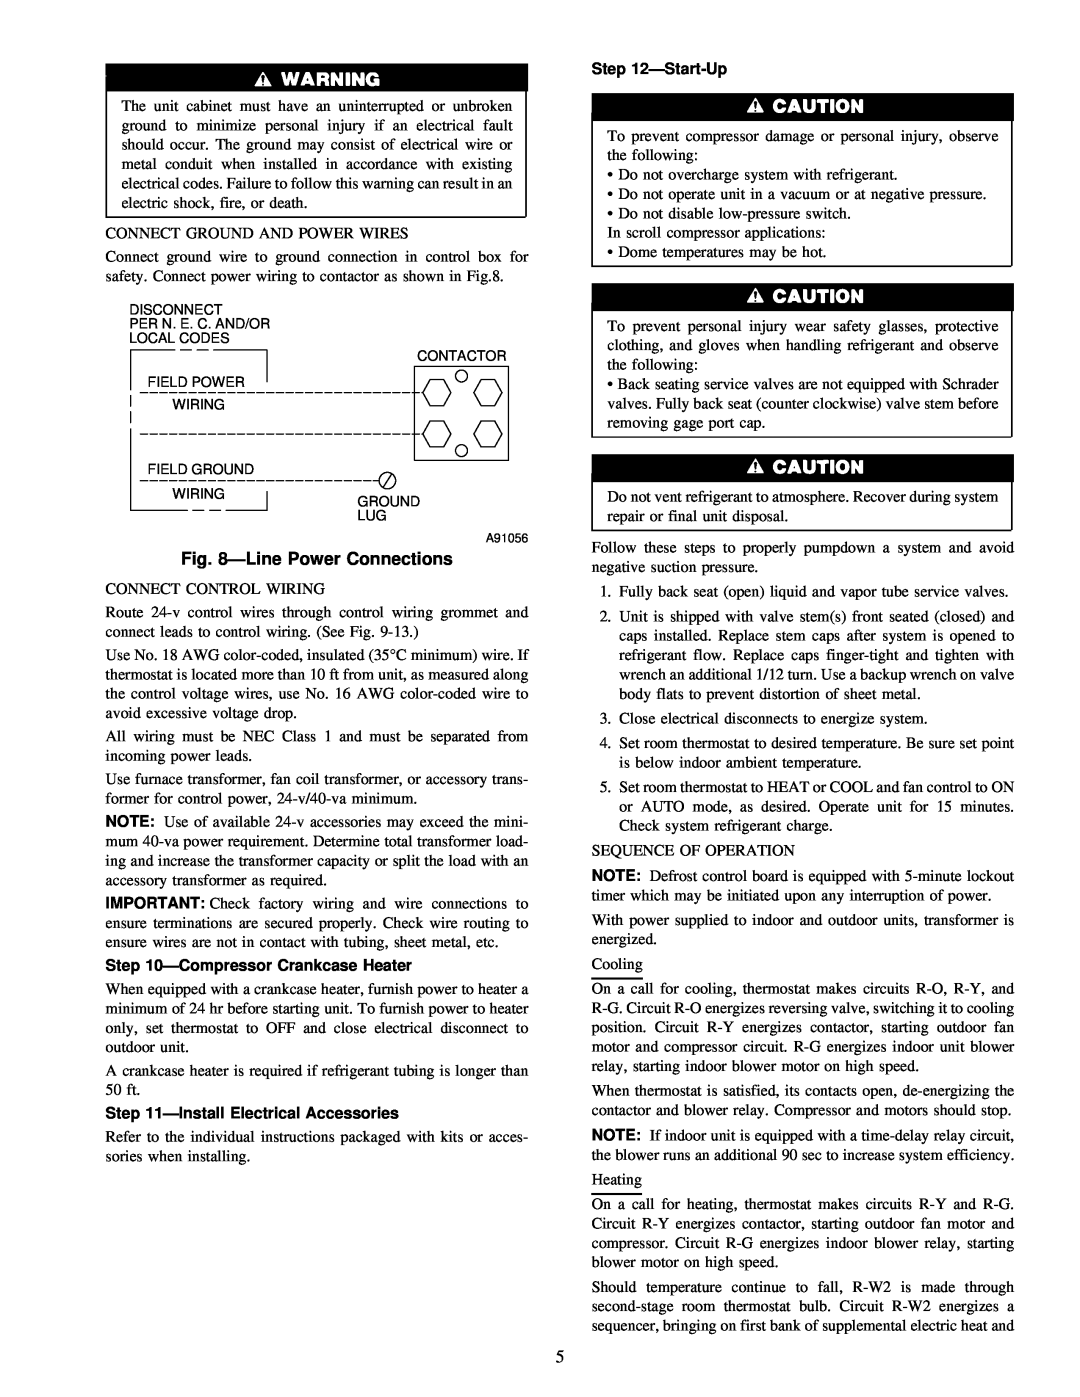 Carrier 38YSA instruction manual LinePower Connections, Start-Up, CompressorCrankcase Heater, InstallElectrical Accessories 